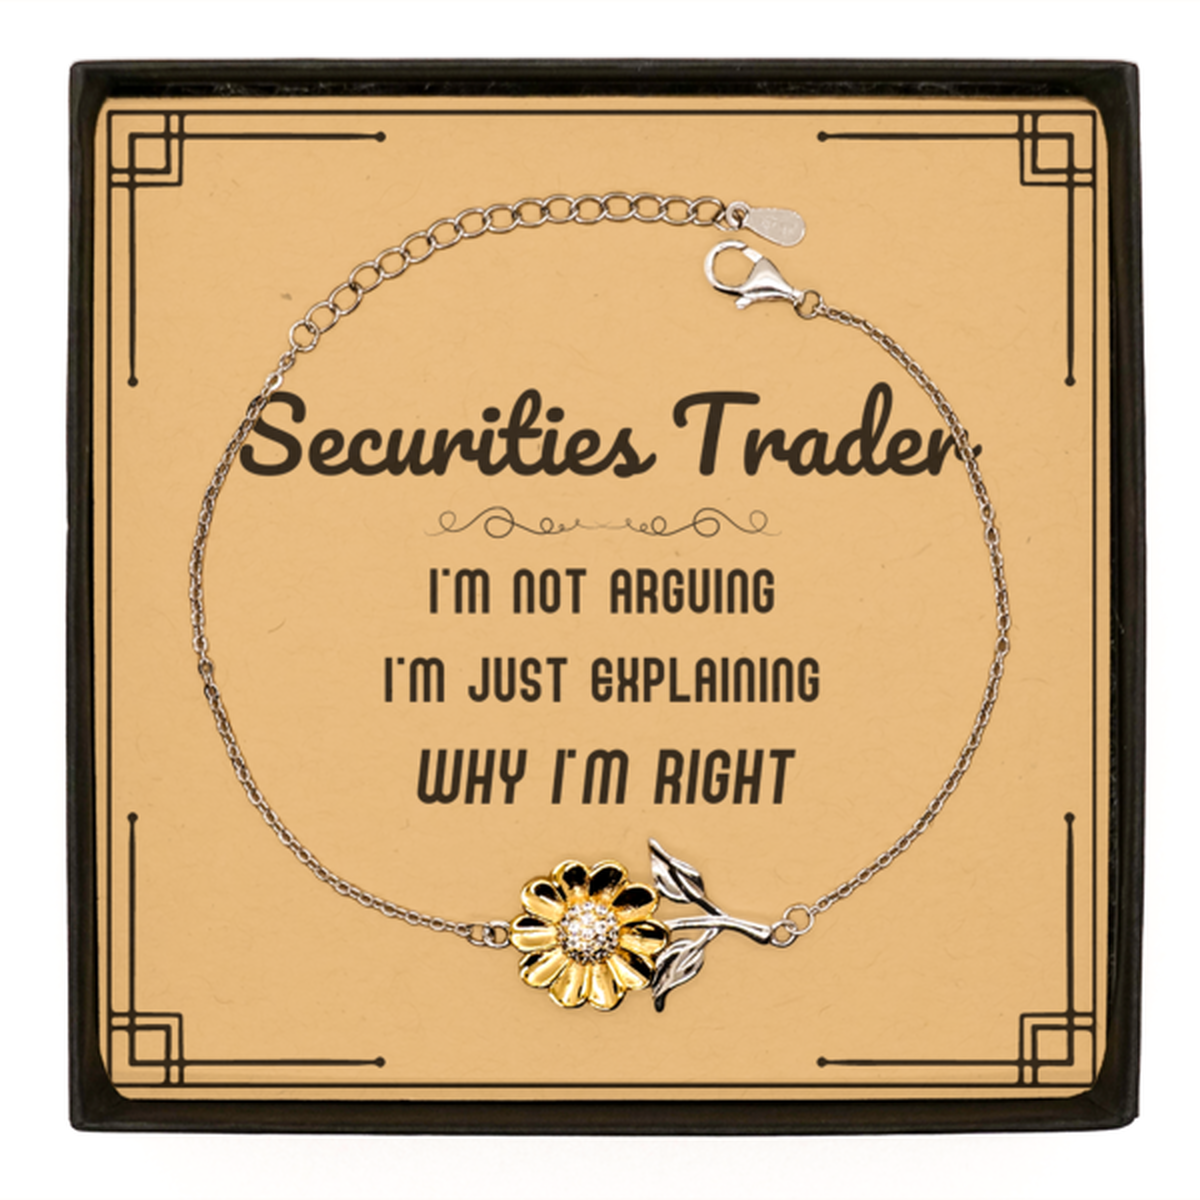 Securities Trader I'm not Arguing. I'm Just Explaining Why I'm RIGHT Sunflower Bracelet, Funny Saying Quote Securities Trader Gifts For Securities Trader Message Card Graduation Birthday Christmas Gifts for Men Women Coworker